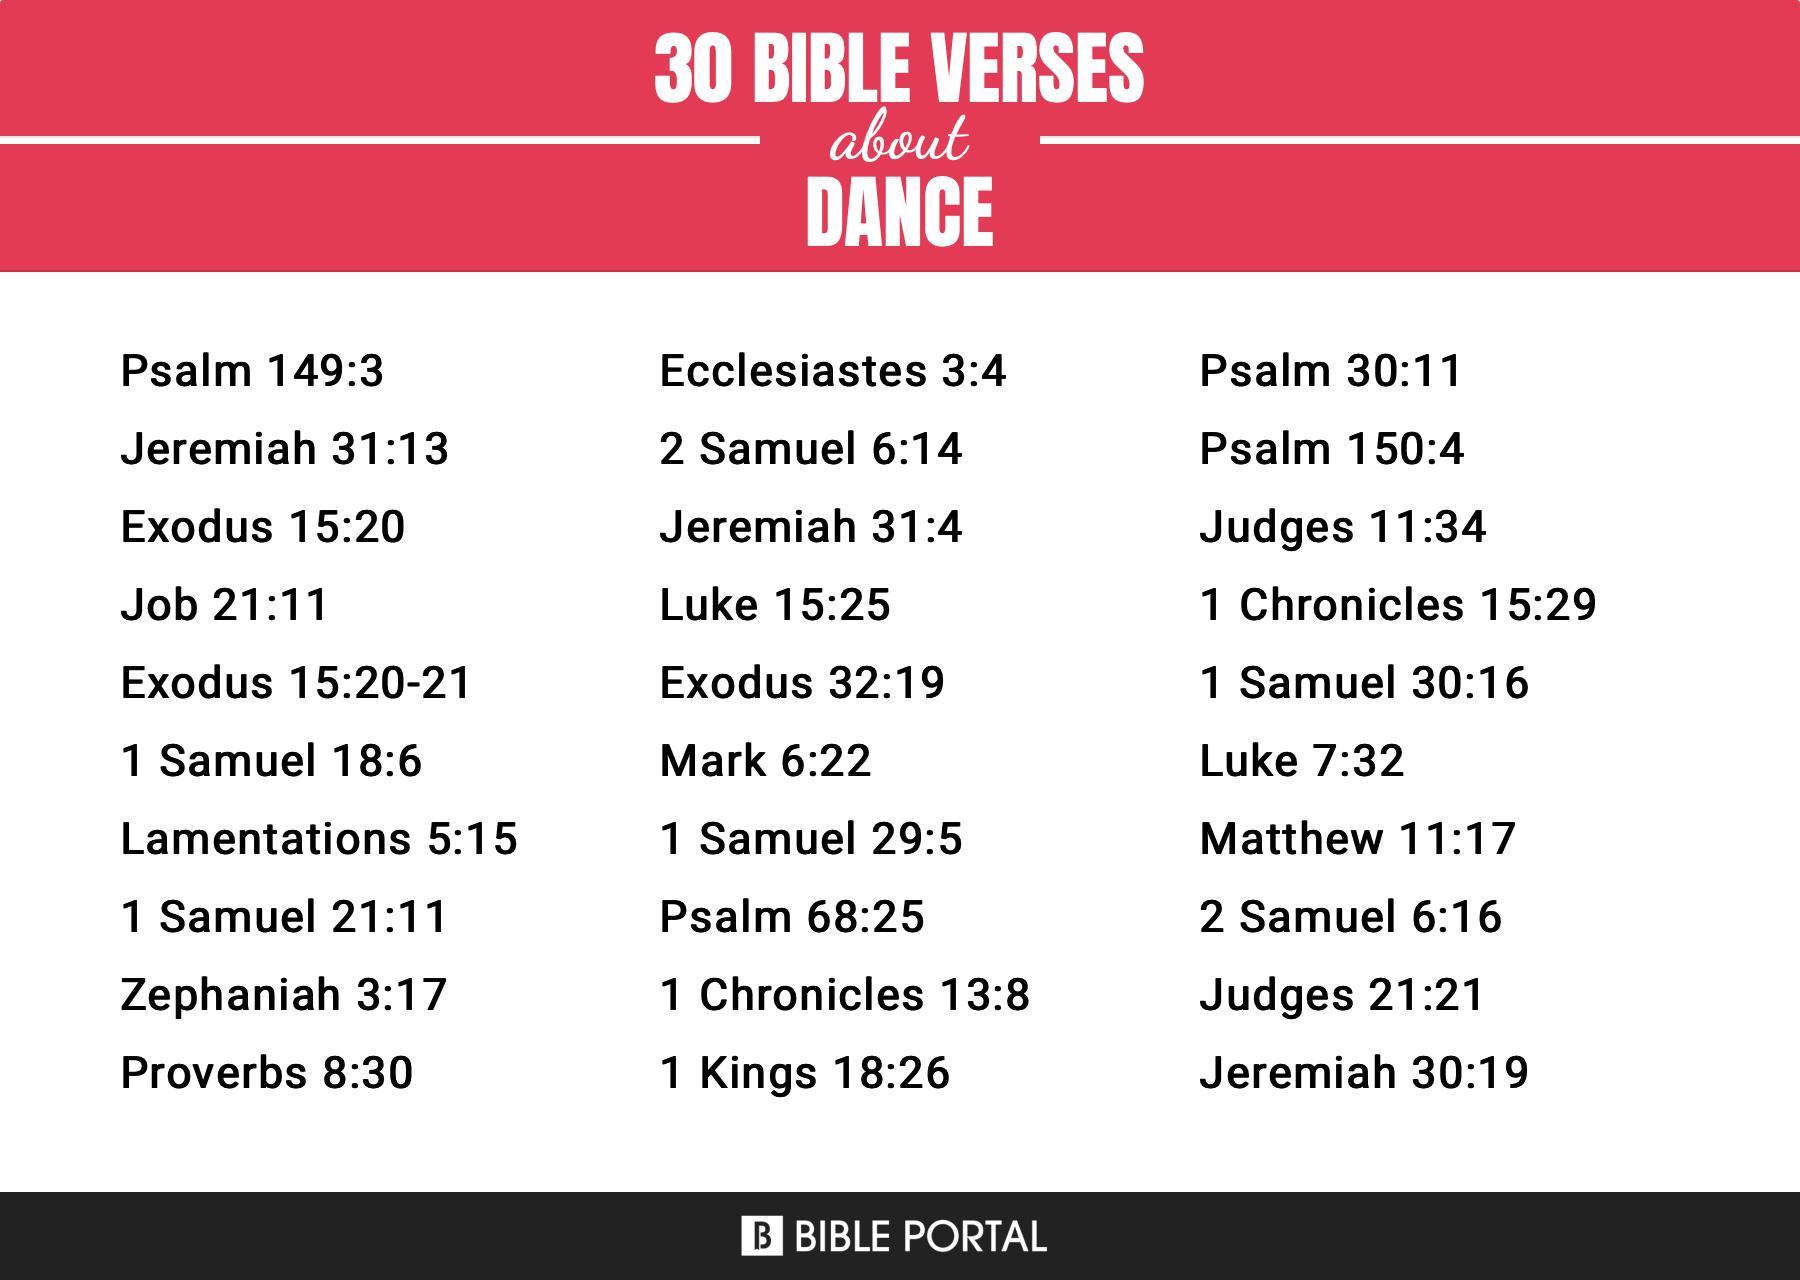 46 Bible Verses about Dance